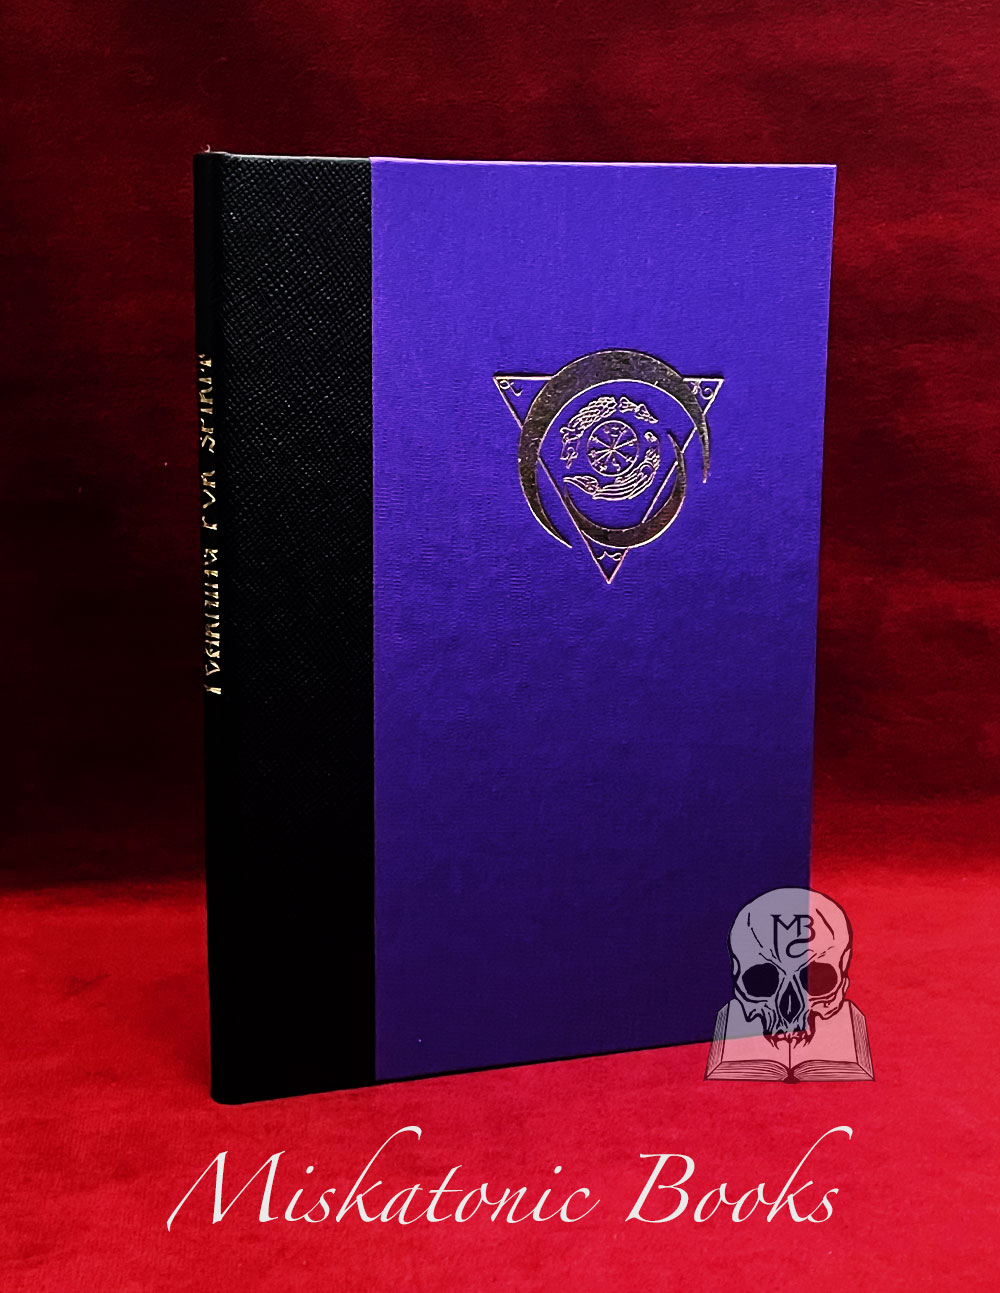 YEARNING FOR SPIRIT by Lucian Blaga (Limited Edition Hardcover)